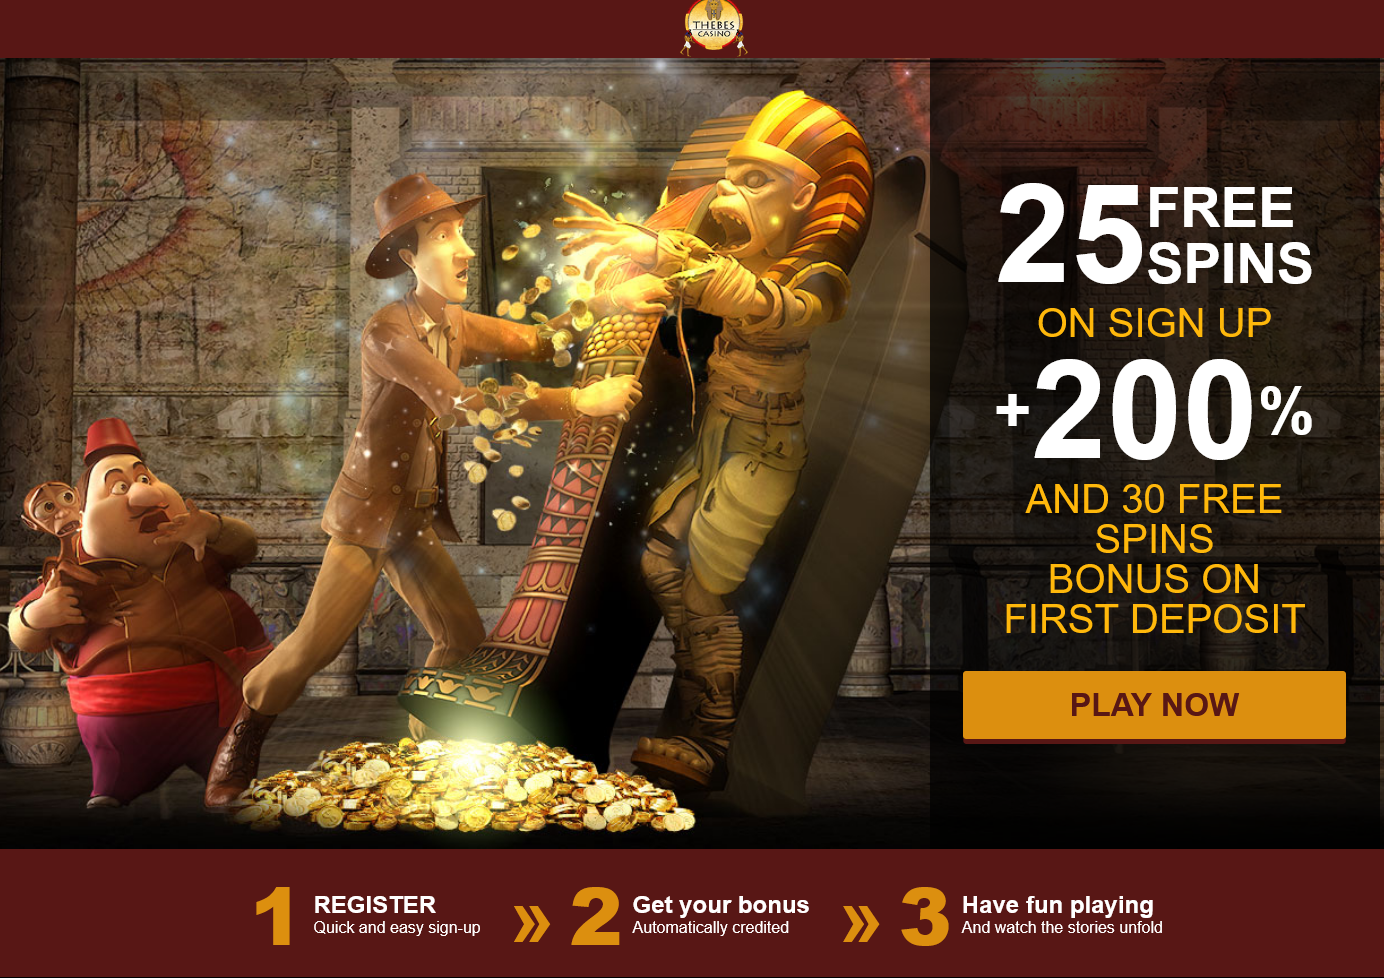 25 FREE
                                                          SPINS ON SIGN
                                                          UP + 200 % AND
                                                          30 FREE SPINS